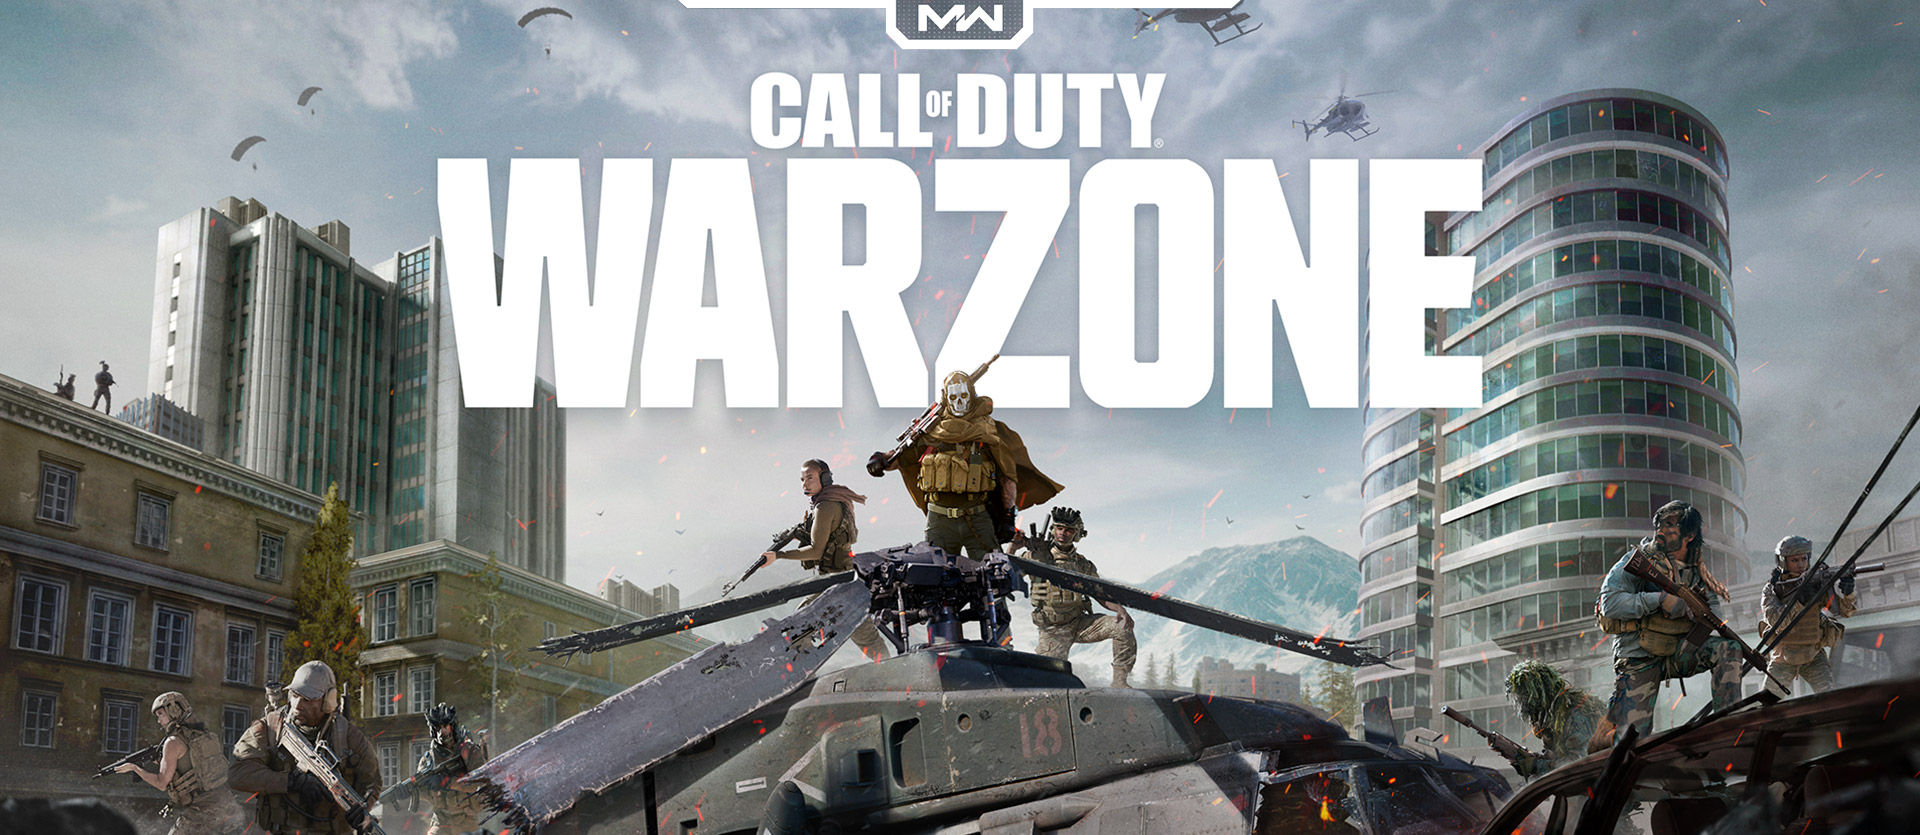 best call of duty games xbox one